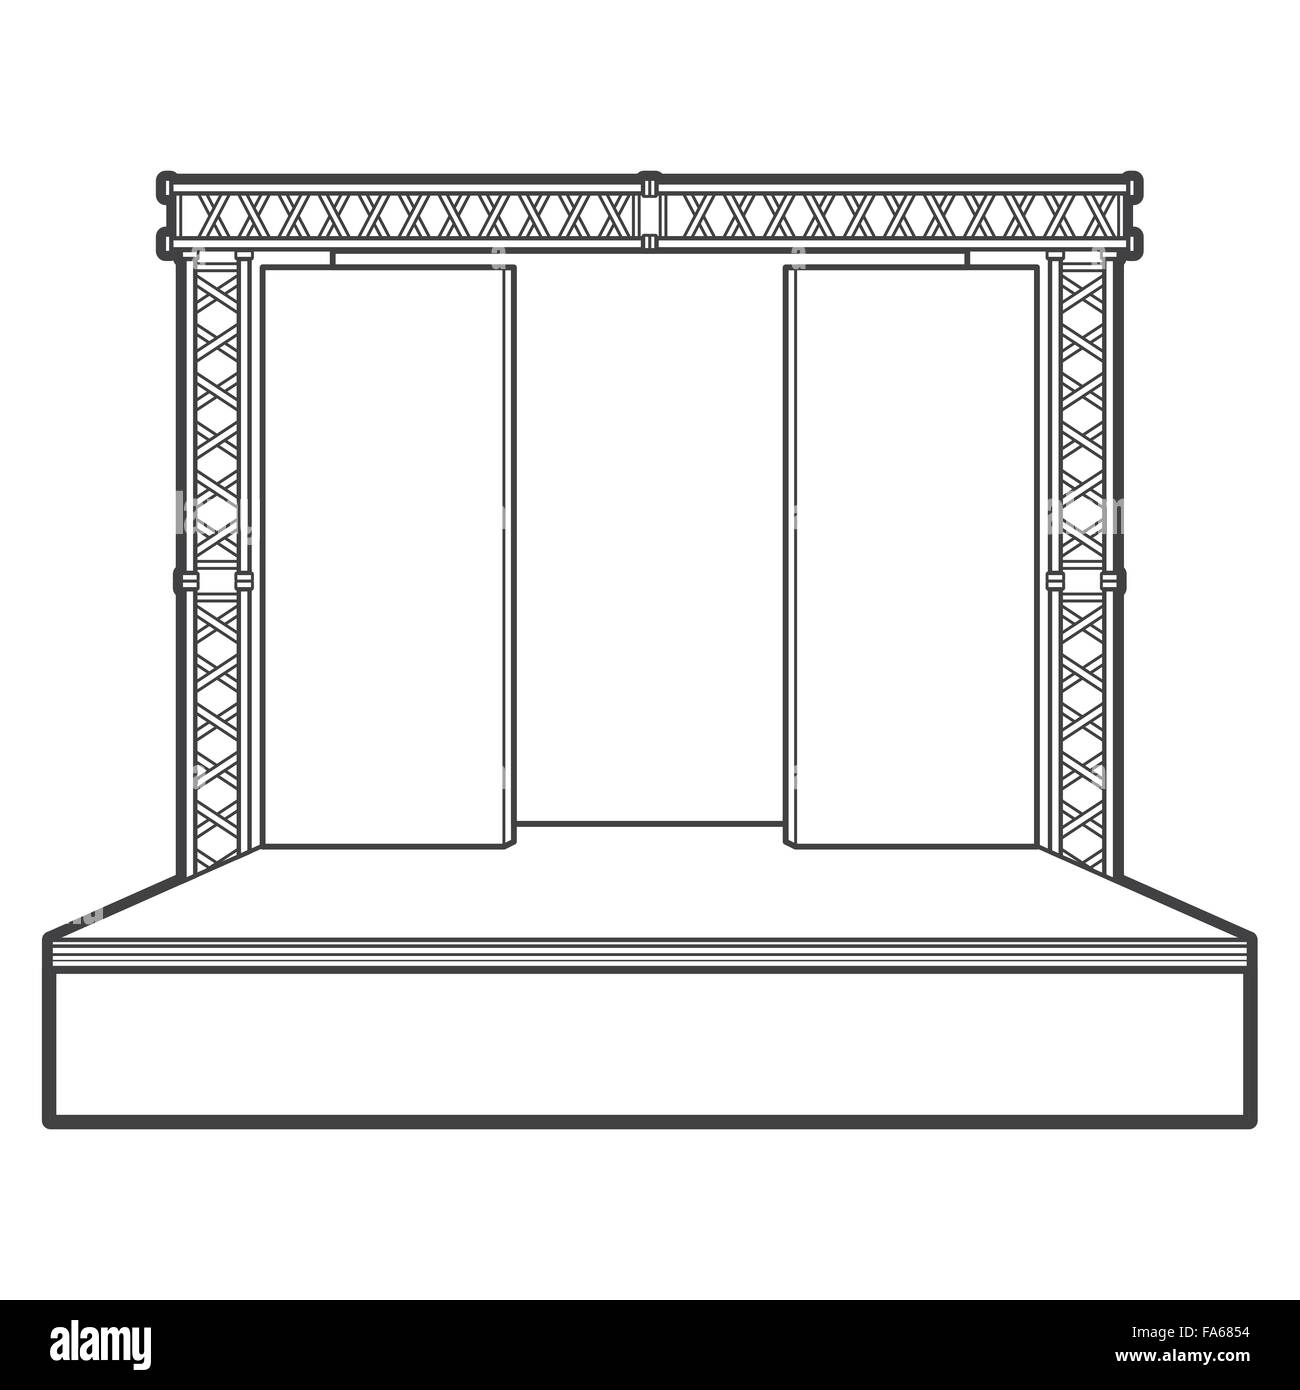 Wedding stage Black and White Stock Photos & Images - Alamy